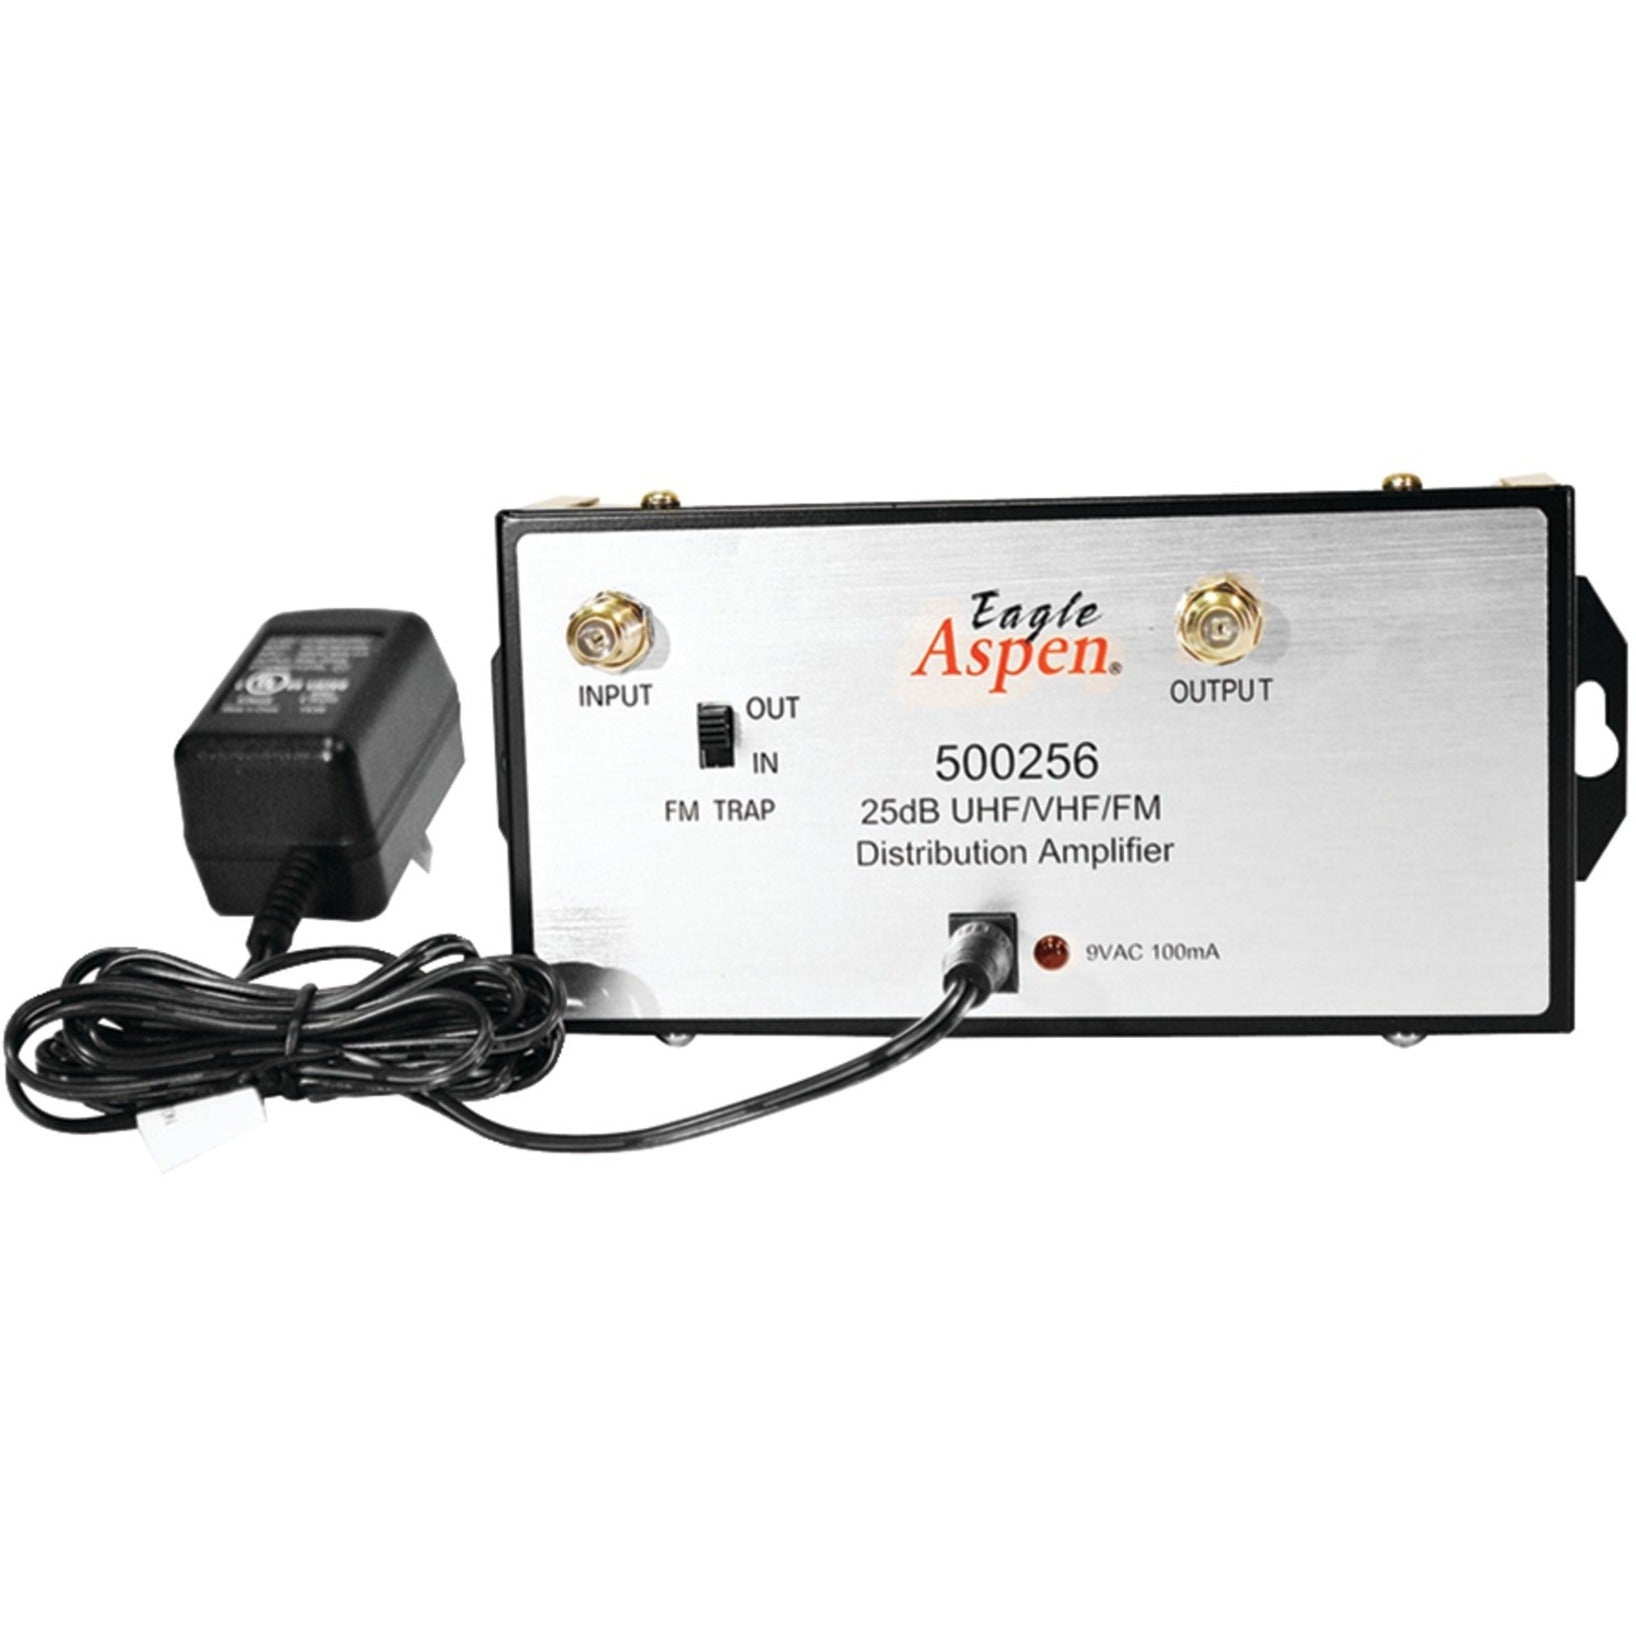 Eagle Aspen 500256 Signal Amplifier, Boosts TV Signal Strength up to 215 MHz